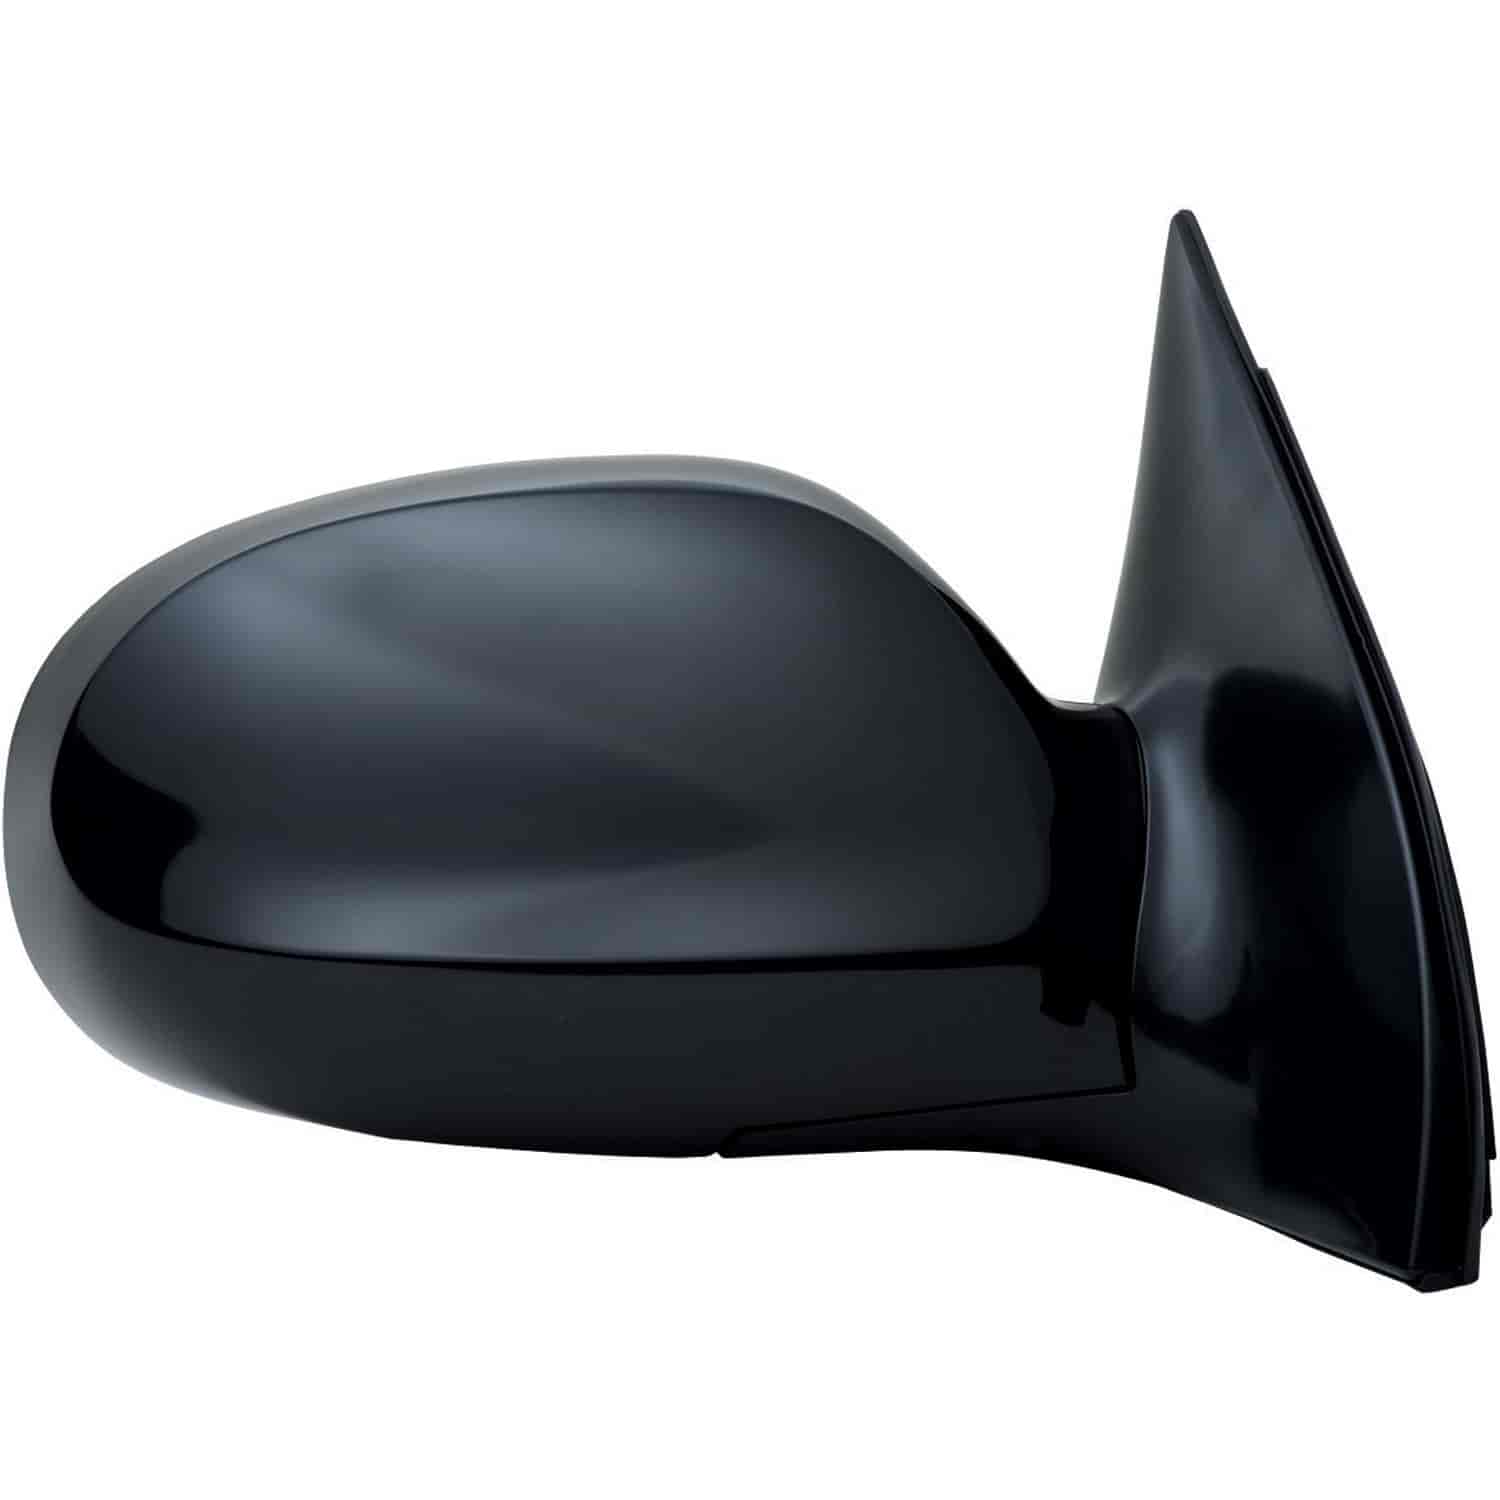 OEM Style Replacement mirror for 02-05 Kia Sedona LX model passenger side mirror tested to fit and f